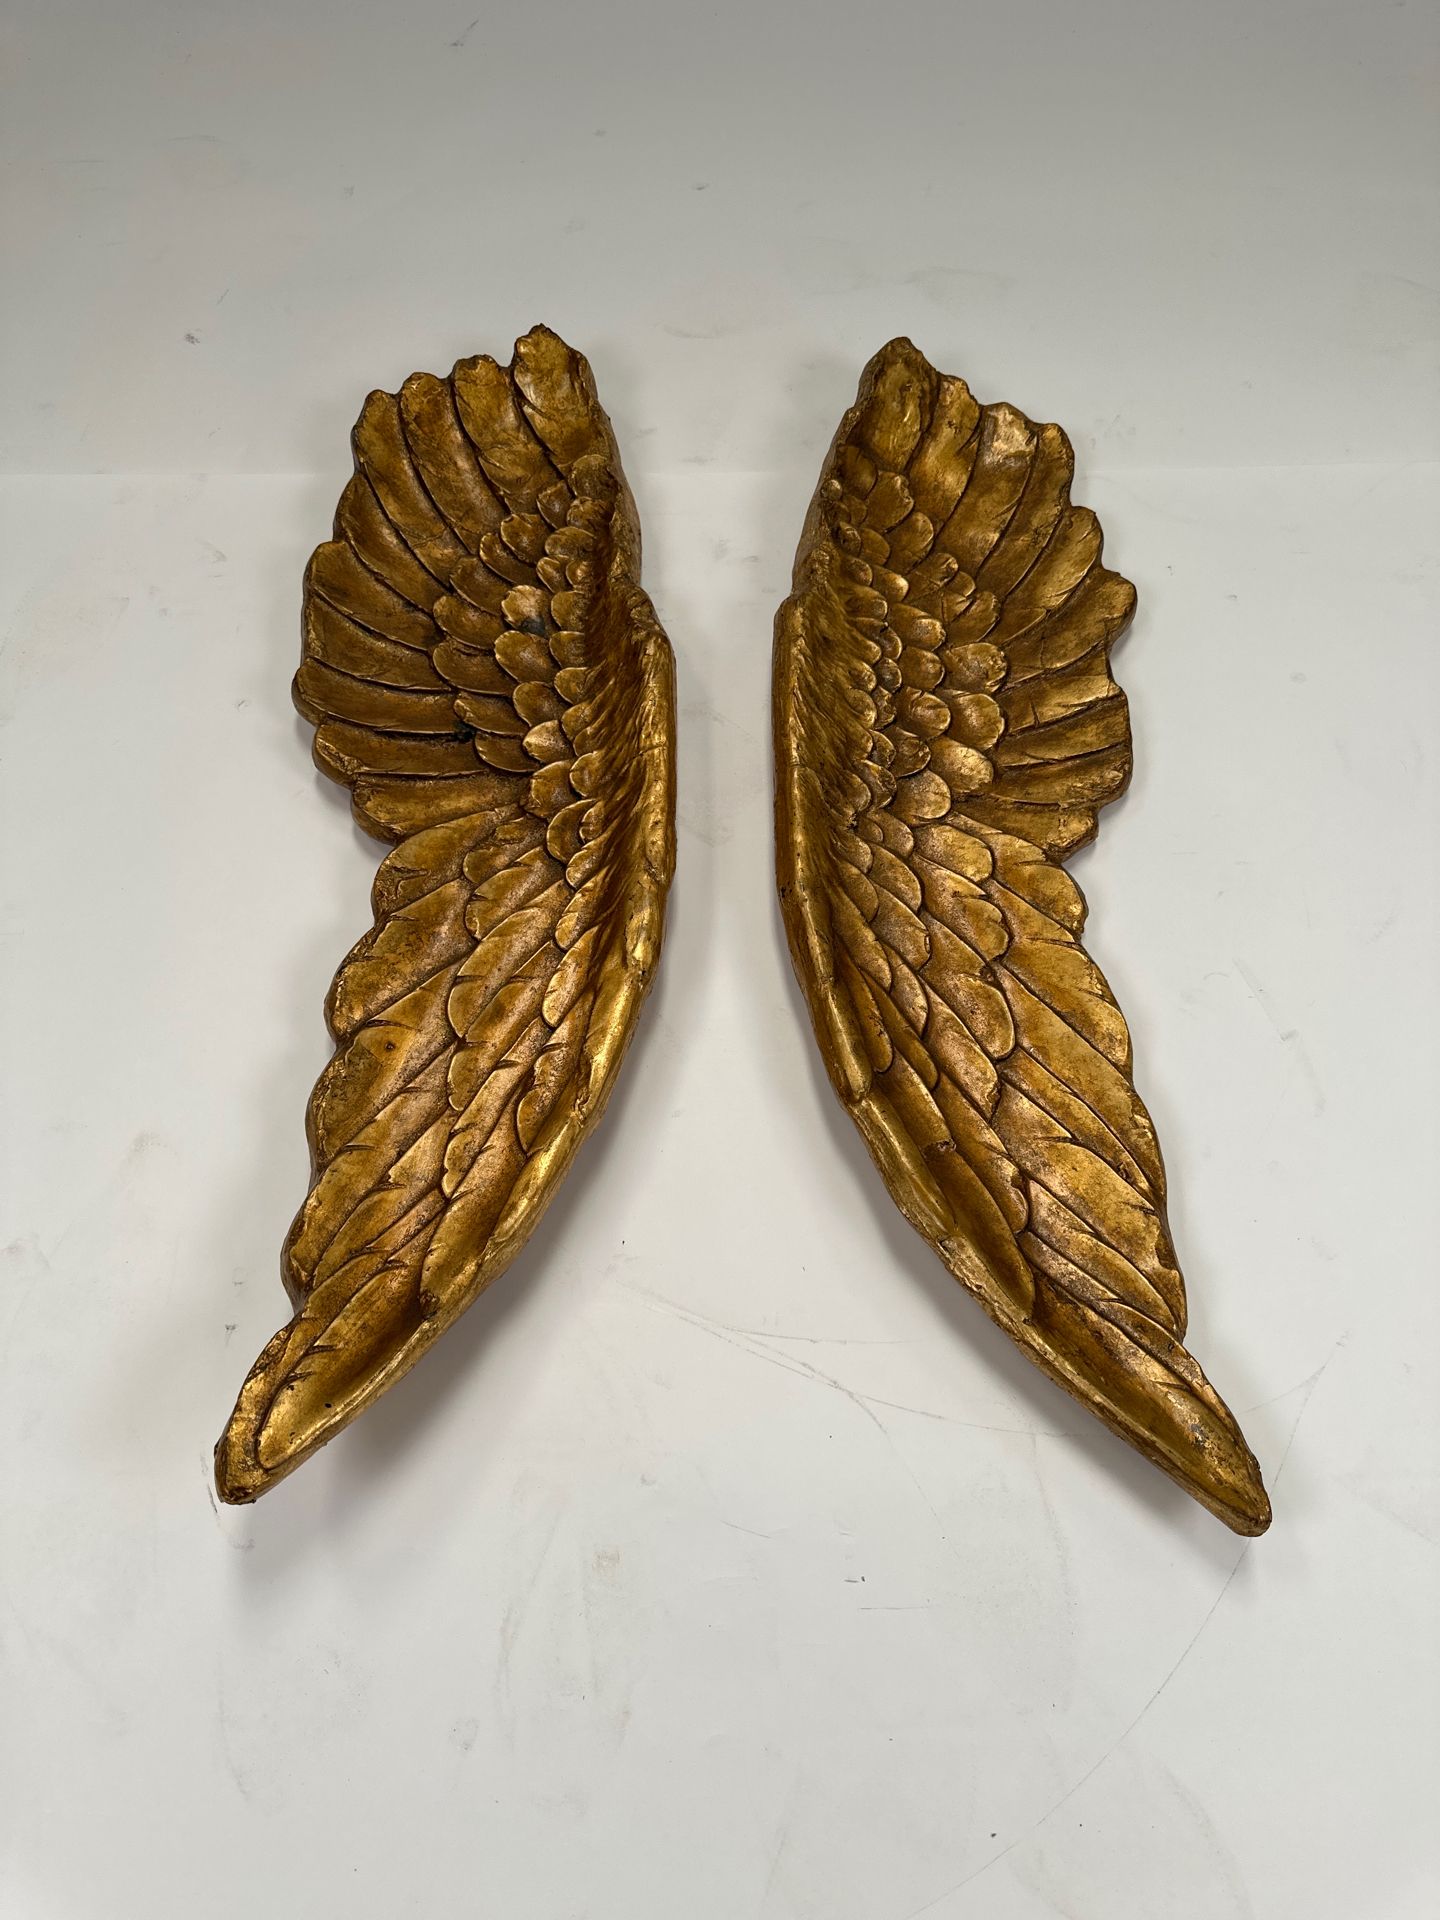 Gold painted Angel Wings